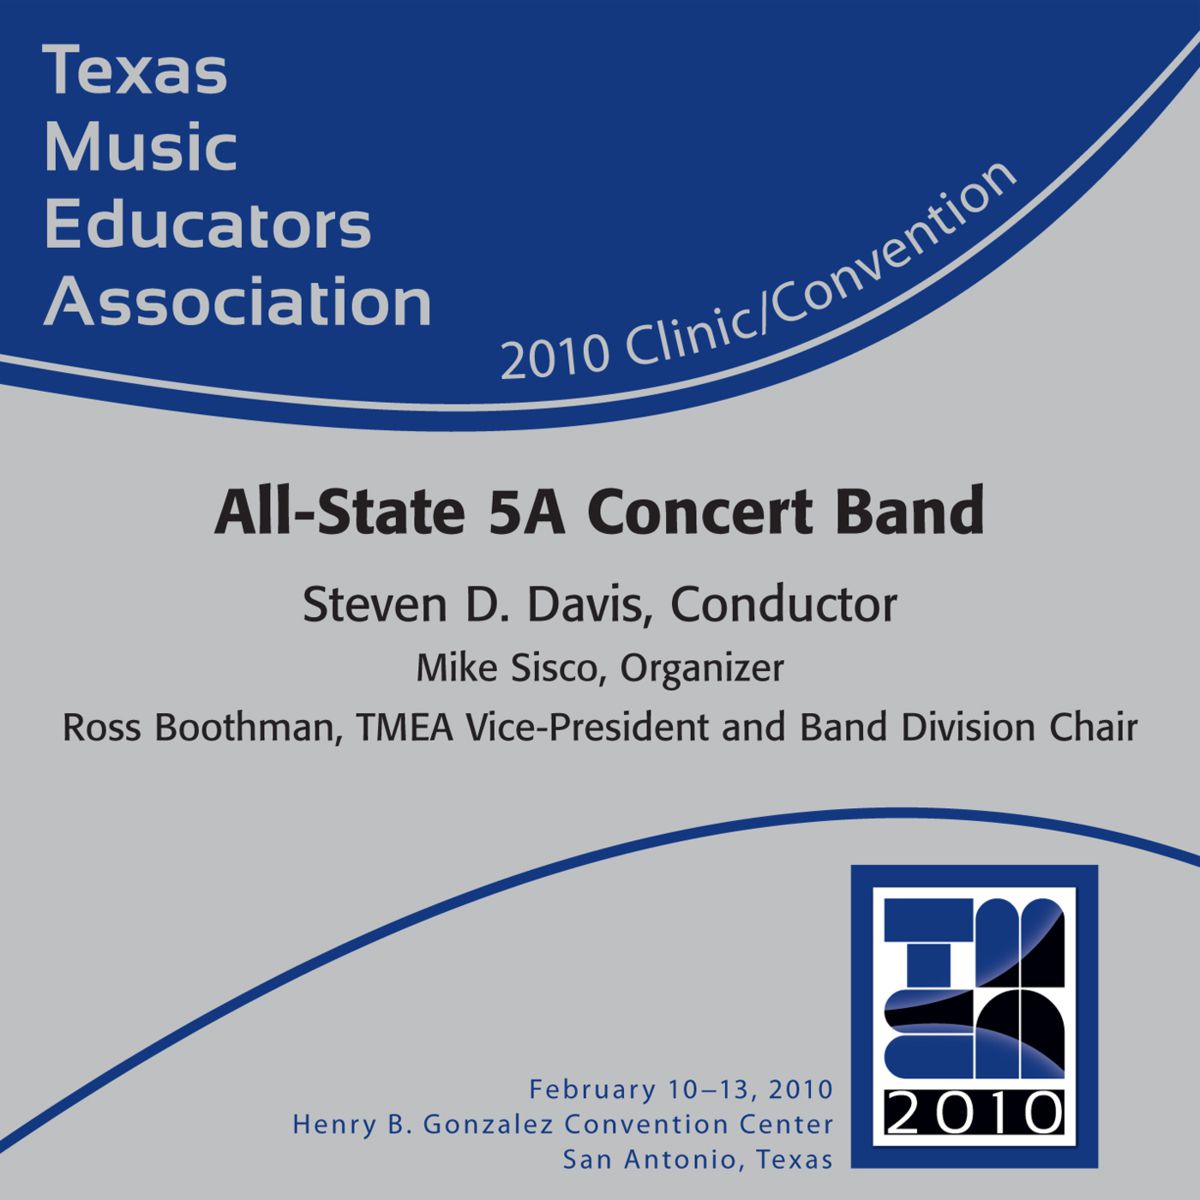 2010 Texas Music Educators Association: All-State 5A Concert Band - clicca qui